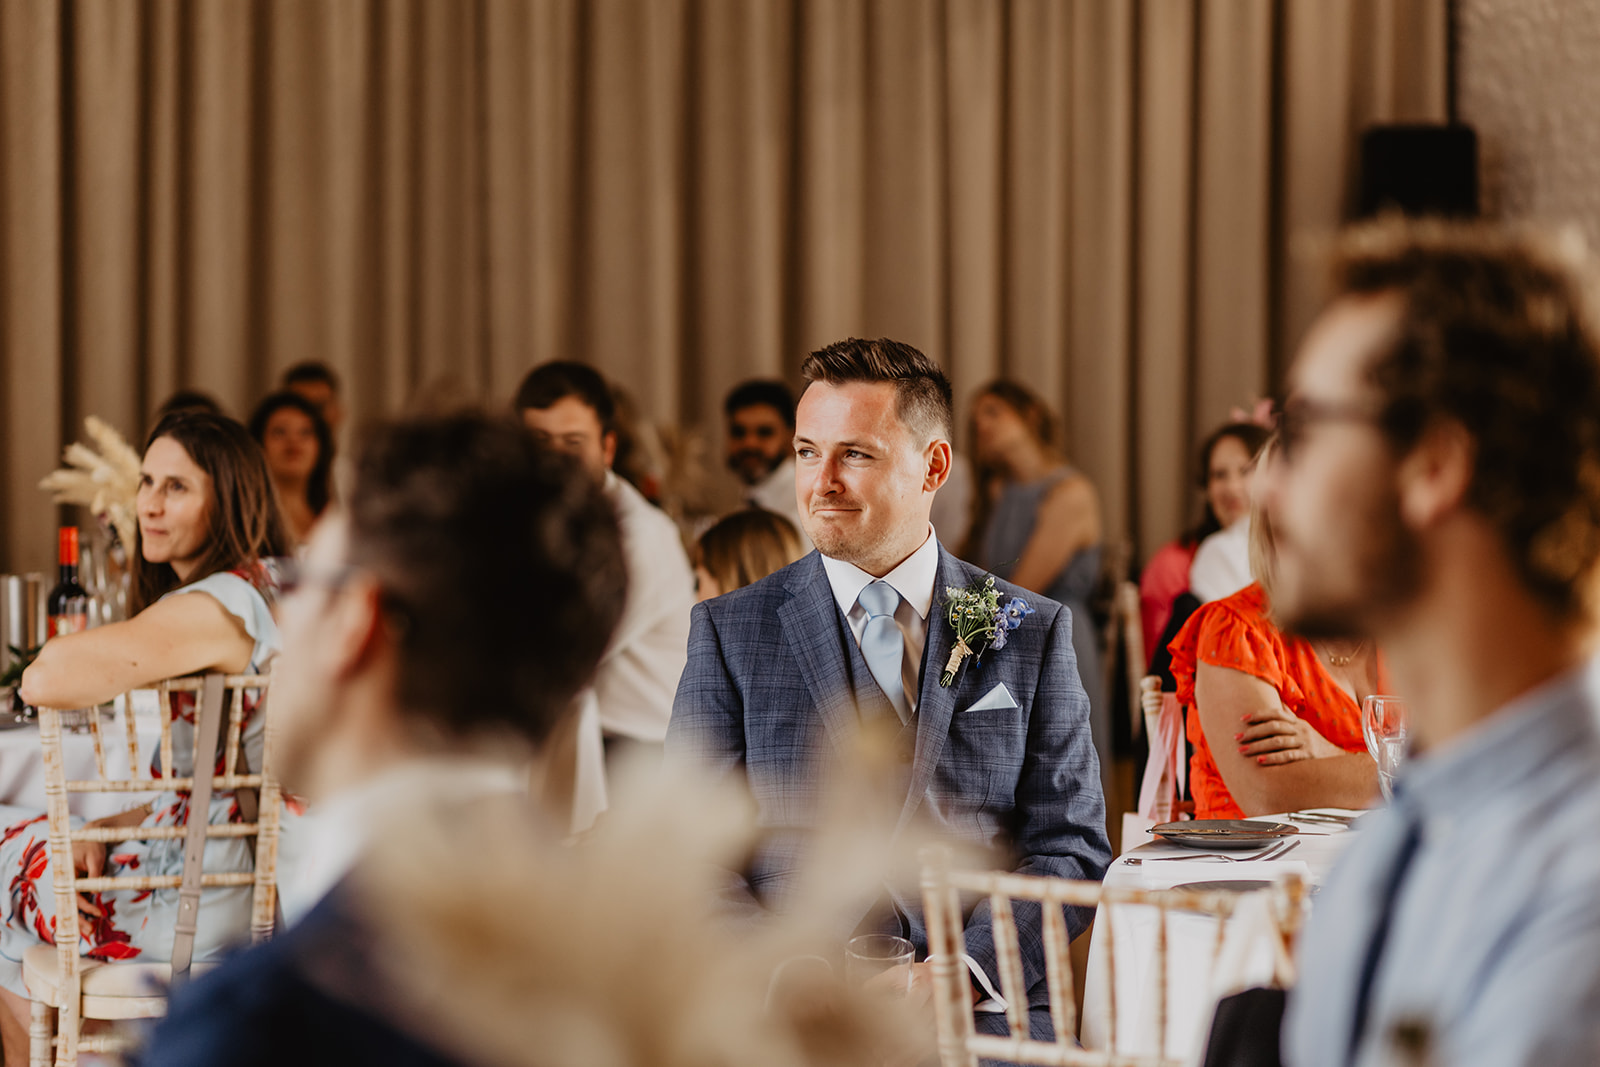 Guests at Field Place Wedding Worthing, Sussex. By OliveJoy Photography.